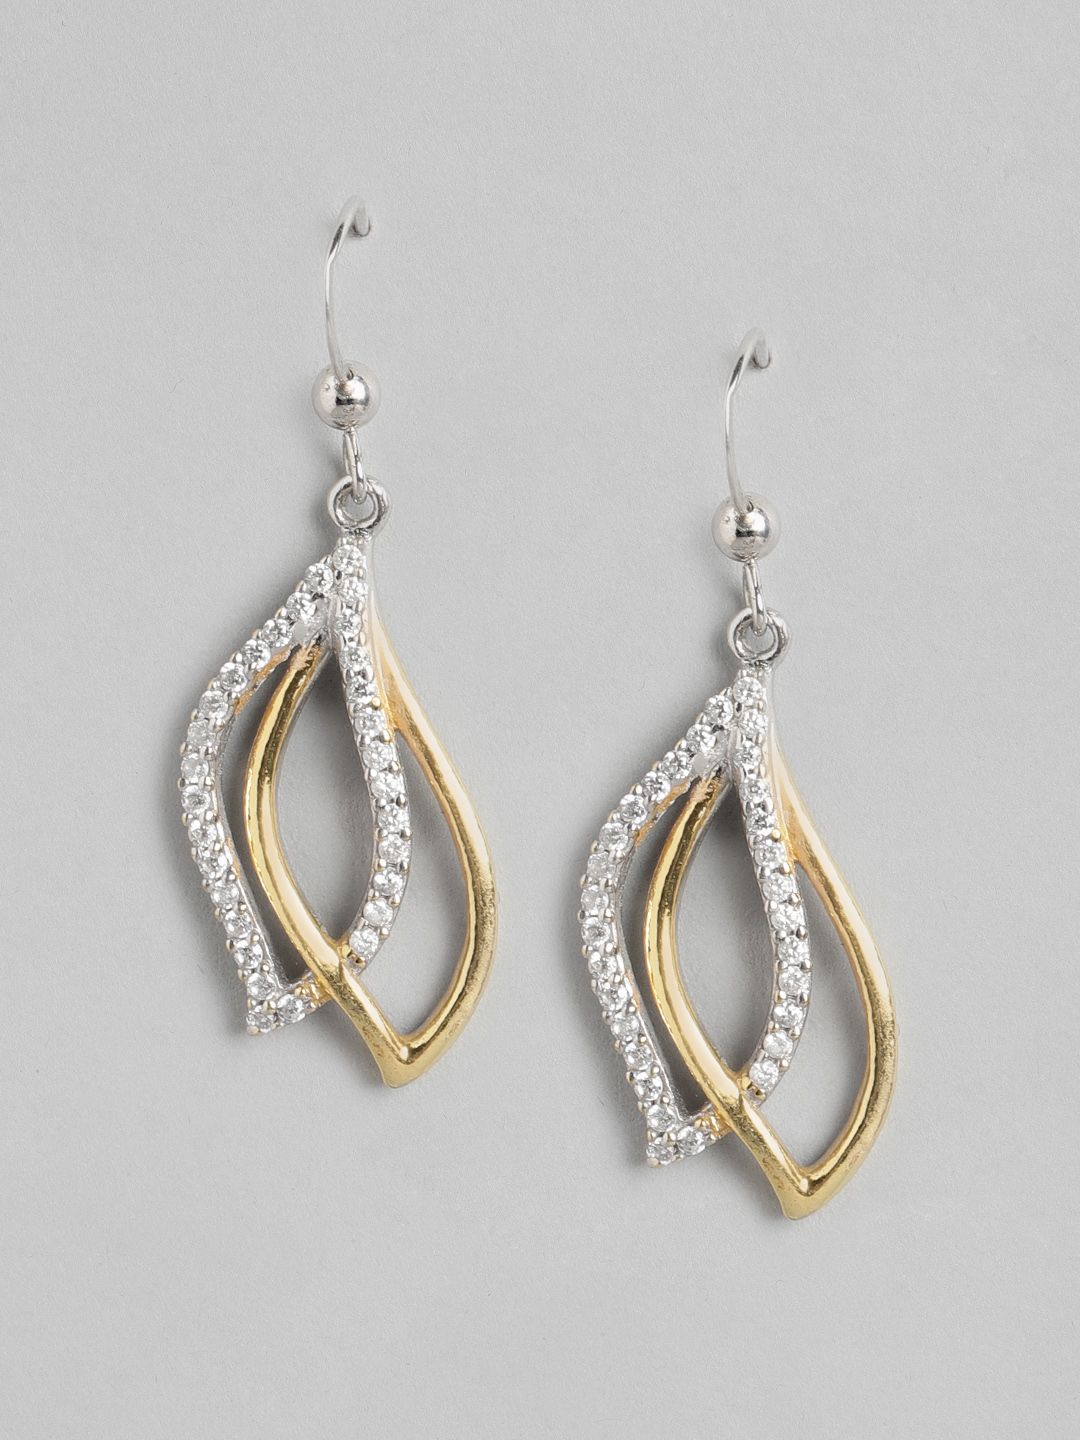 Carlton London 925 Sterling Silver-Toned & Gold-Toned Feather Shaped Drop Earrings Price in India